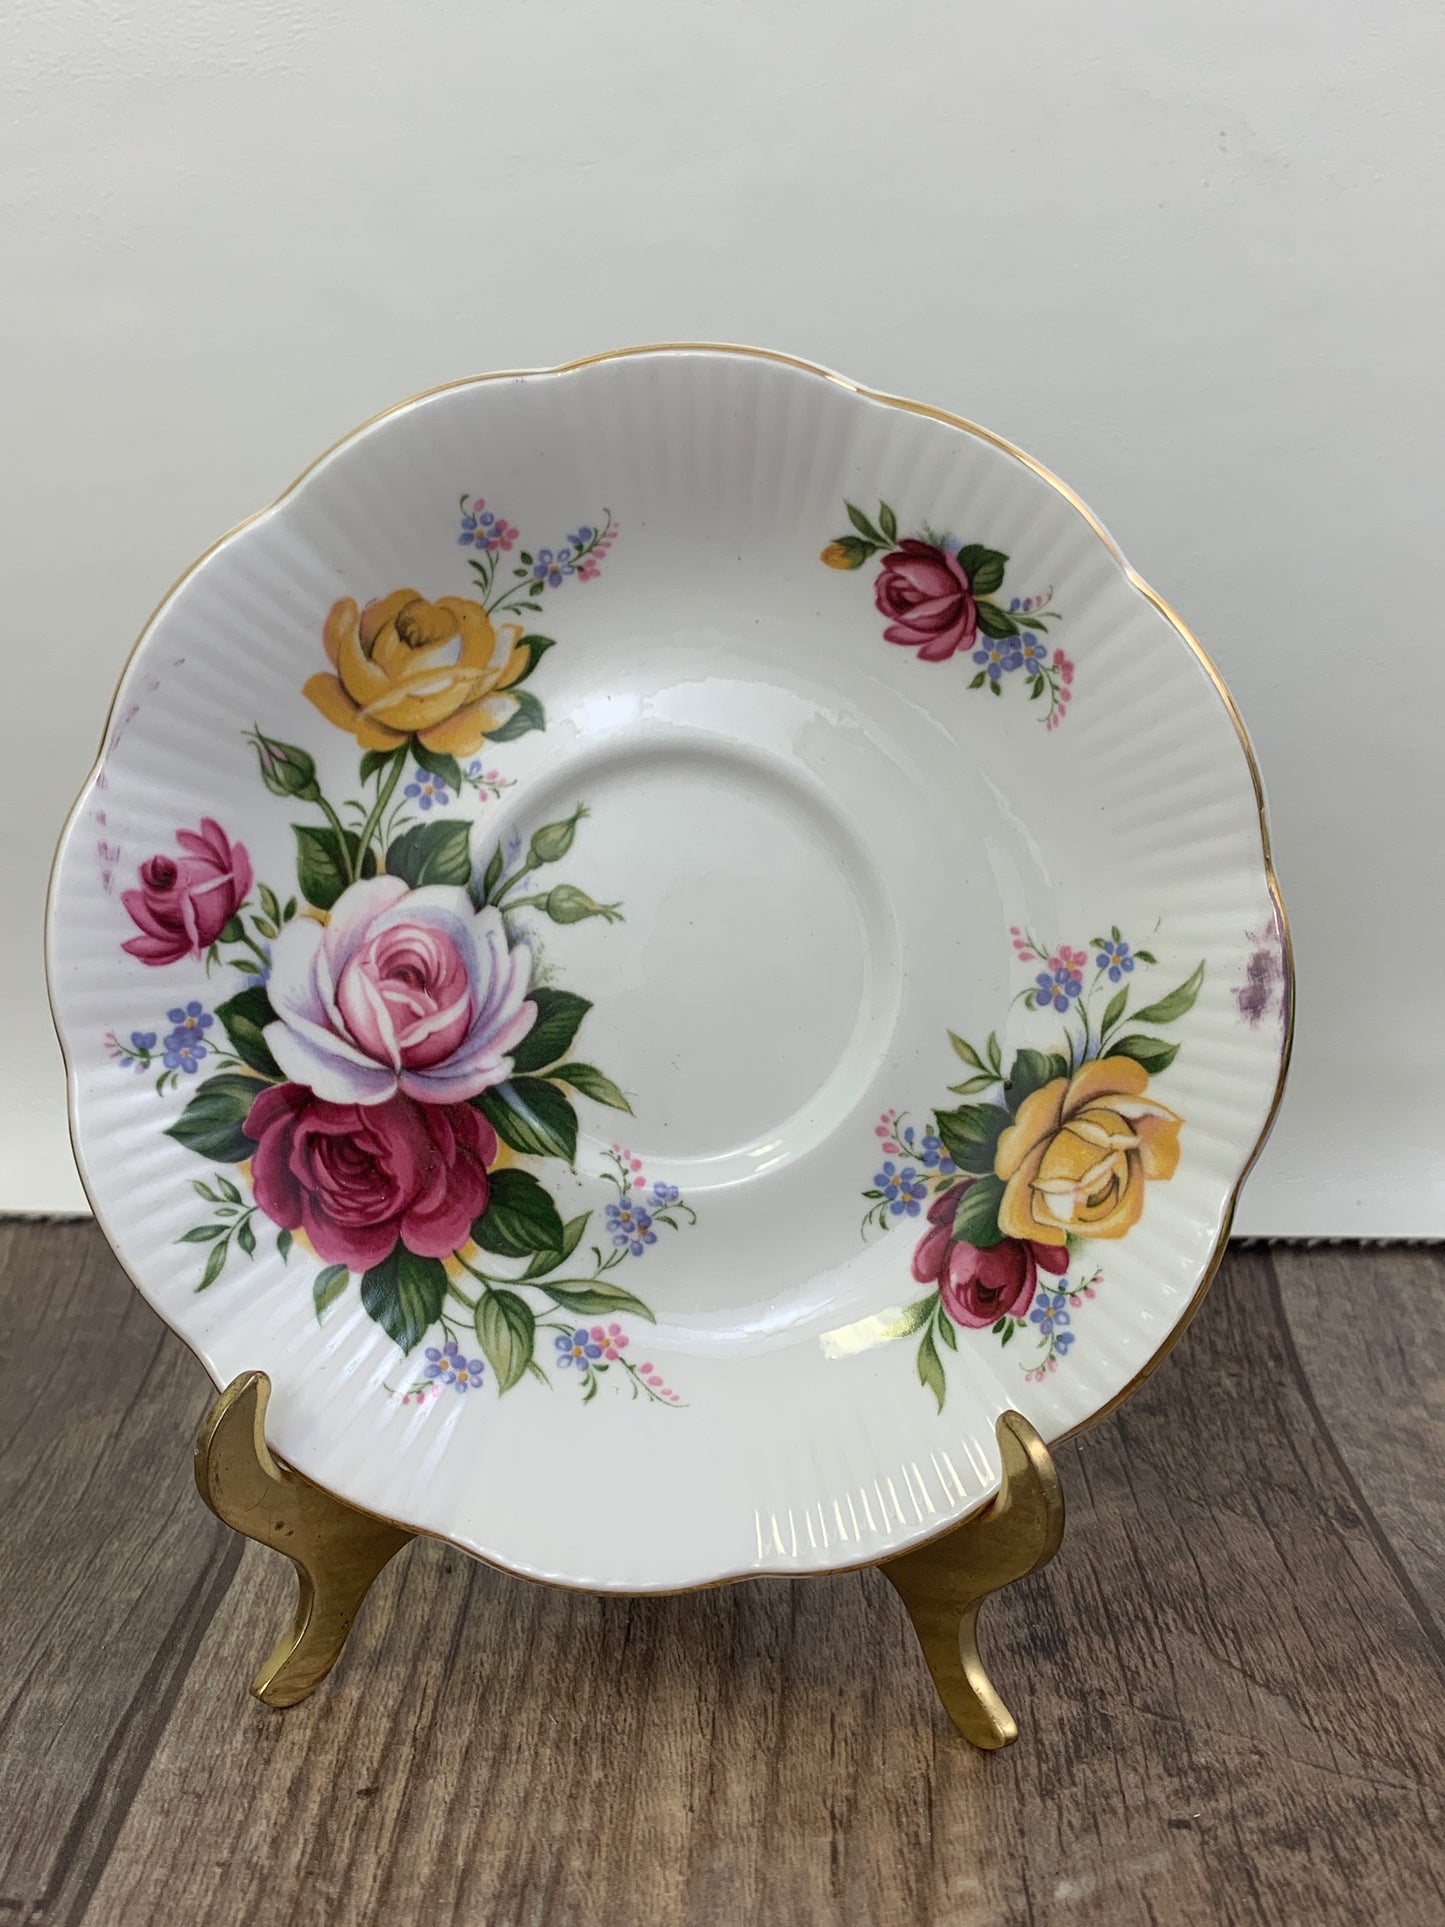 Pink, Yellow, and Red Floral Teacup and Saucer